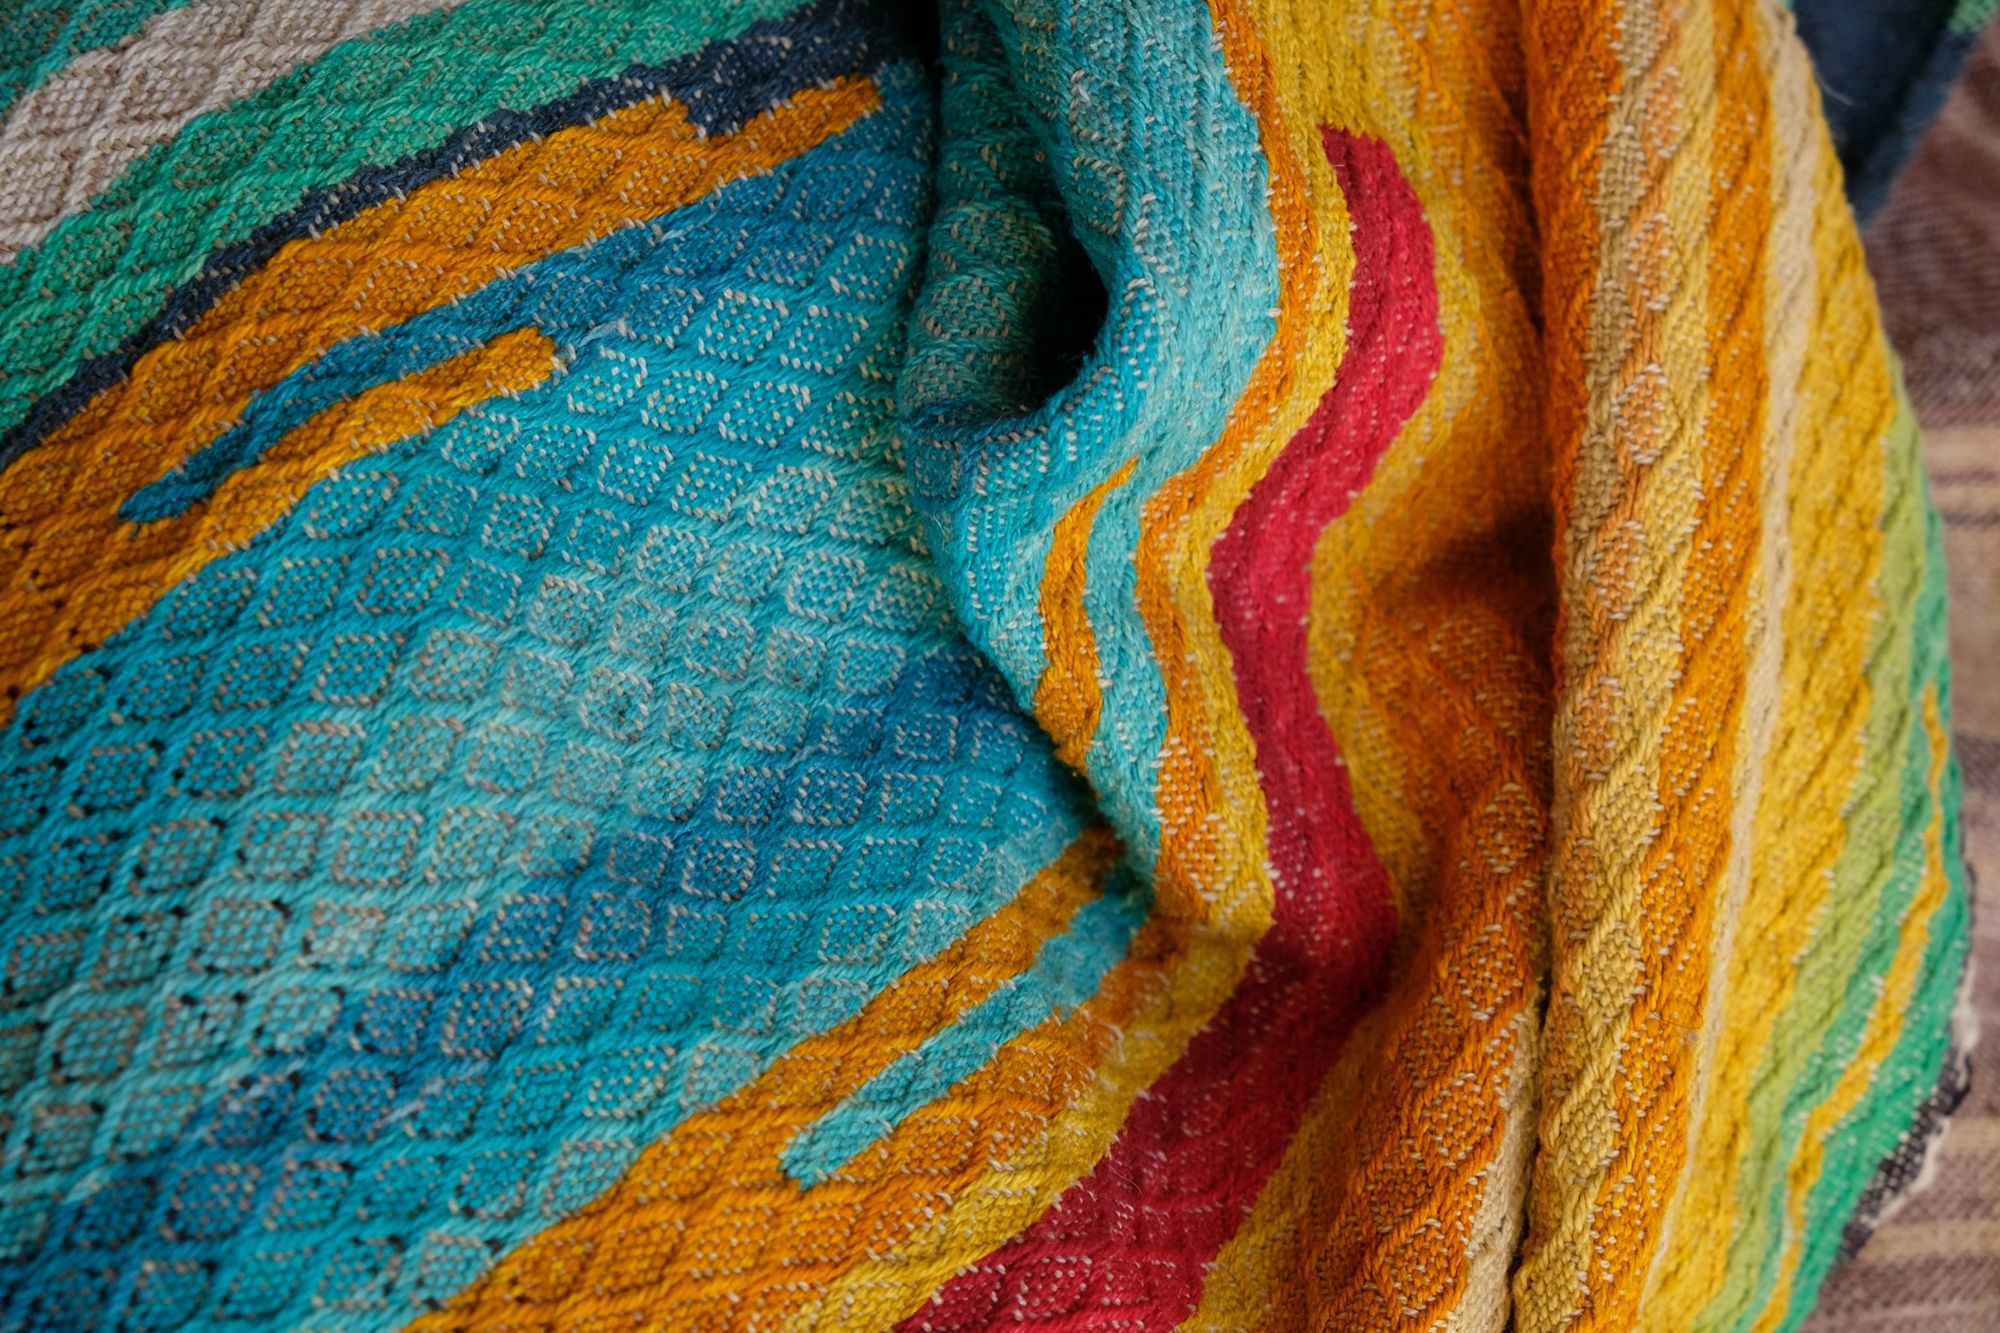 Handwoven fabric laying on a wooden floor, it is red, orange, blue, yellow, purple, brown and green